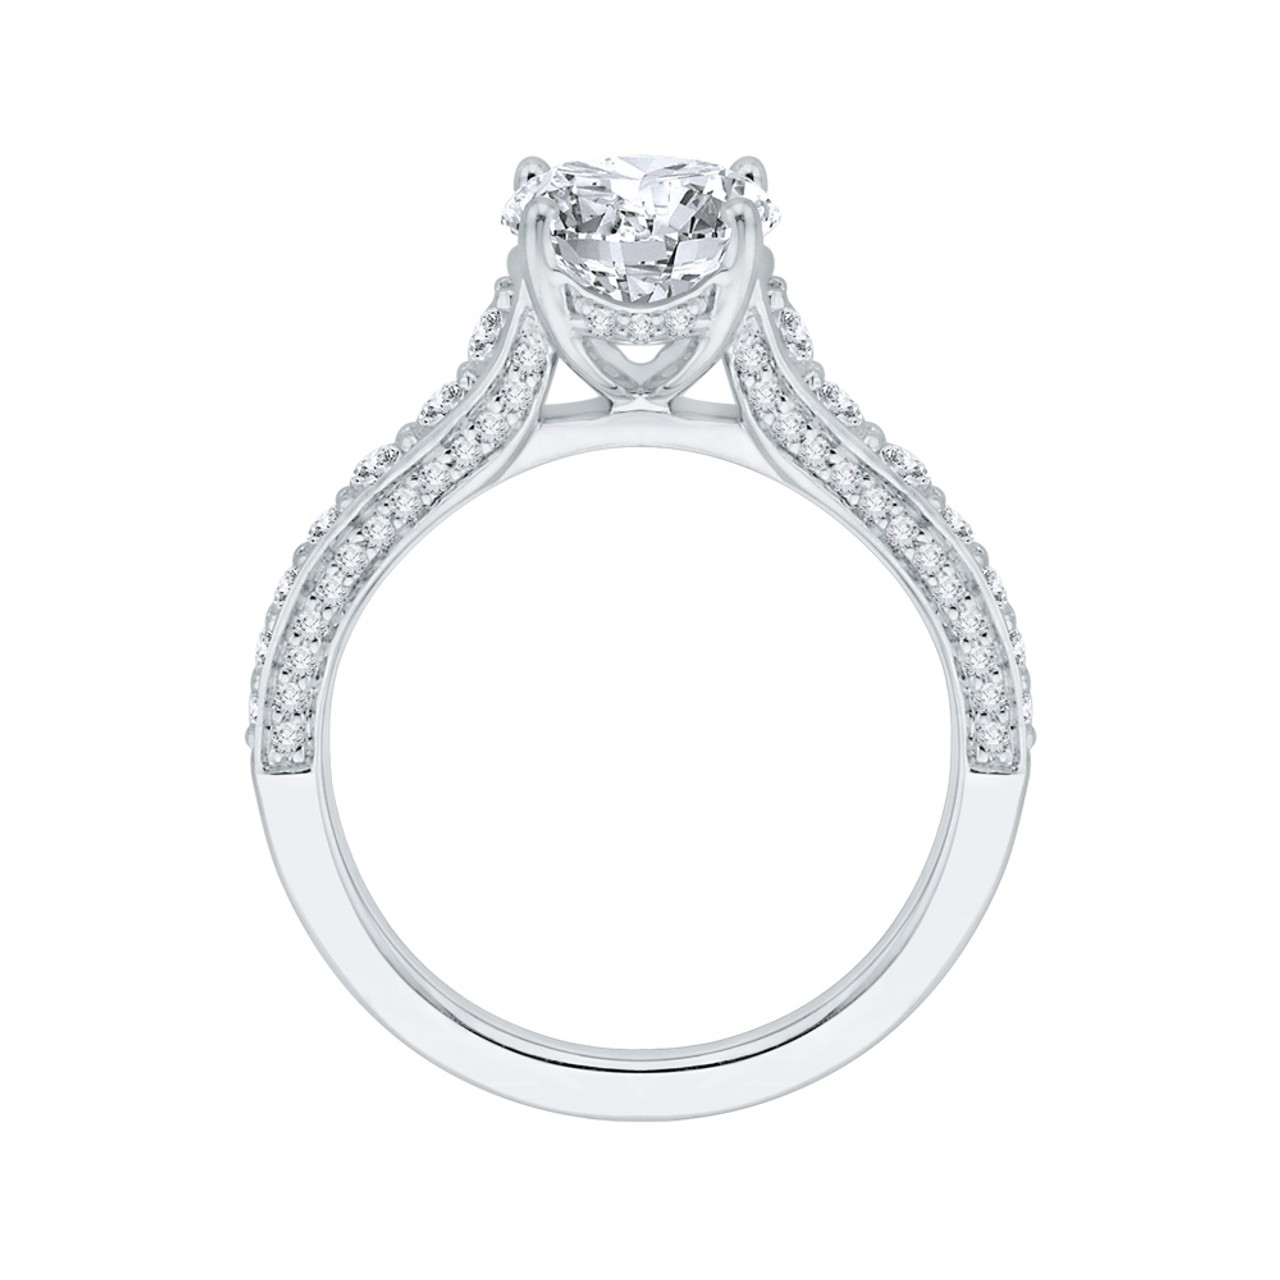 Boutique White Gold Diamond Engagement Ring